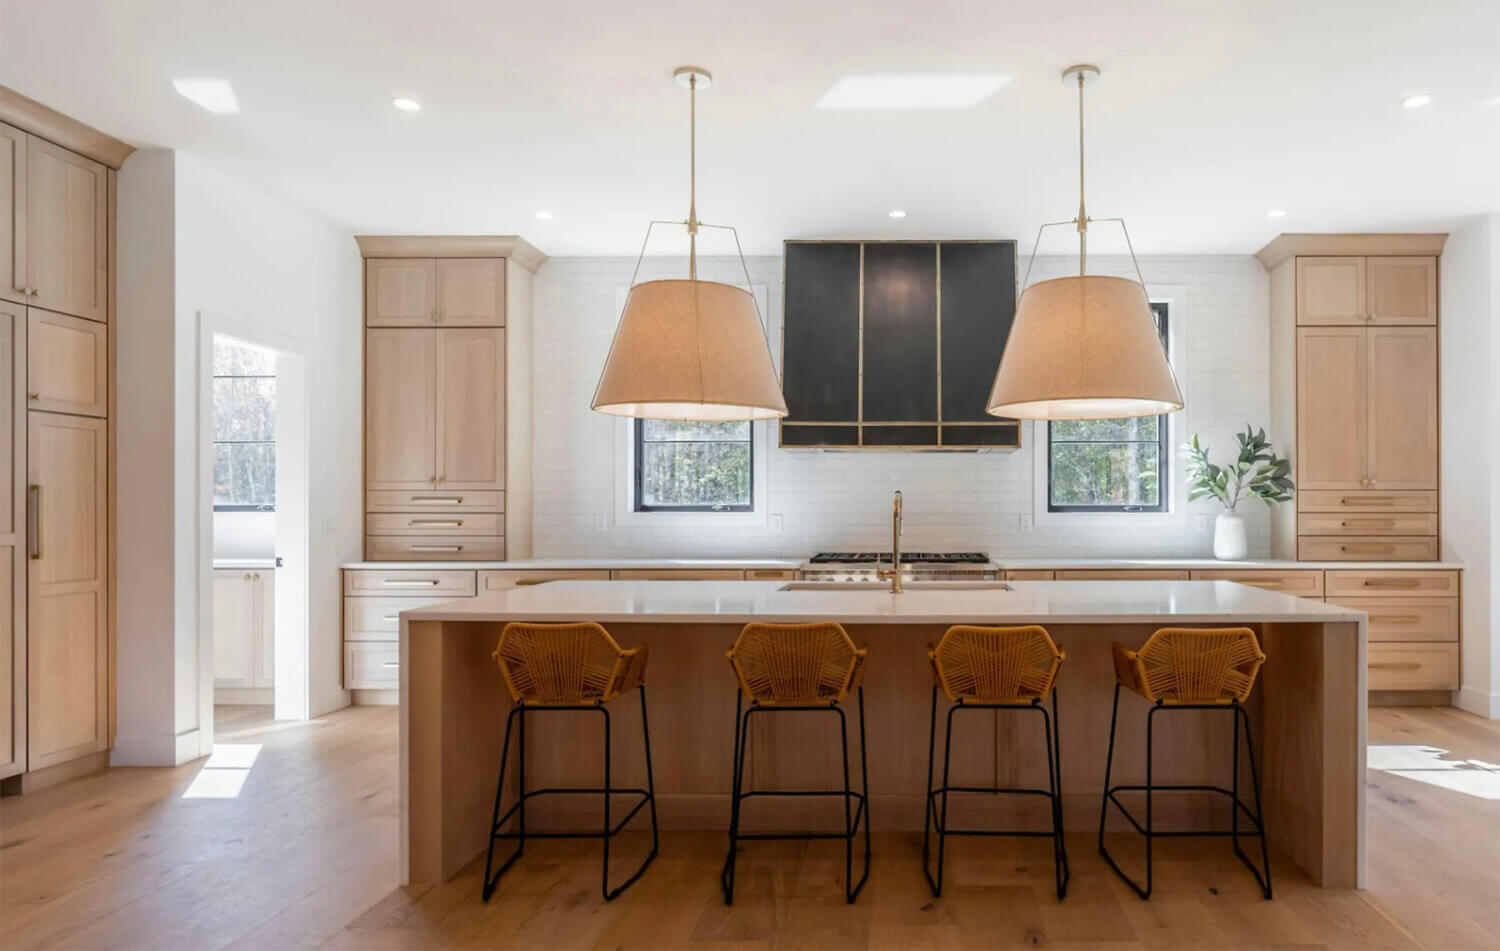 A beautiful all wood kitchen with quarter-sawn white oak cabinets with a soft, light stain color accented by golden satin brass pulls and hardware with a dark gray metal hood.